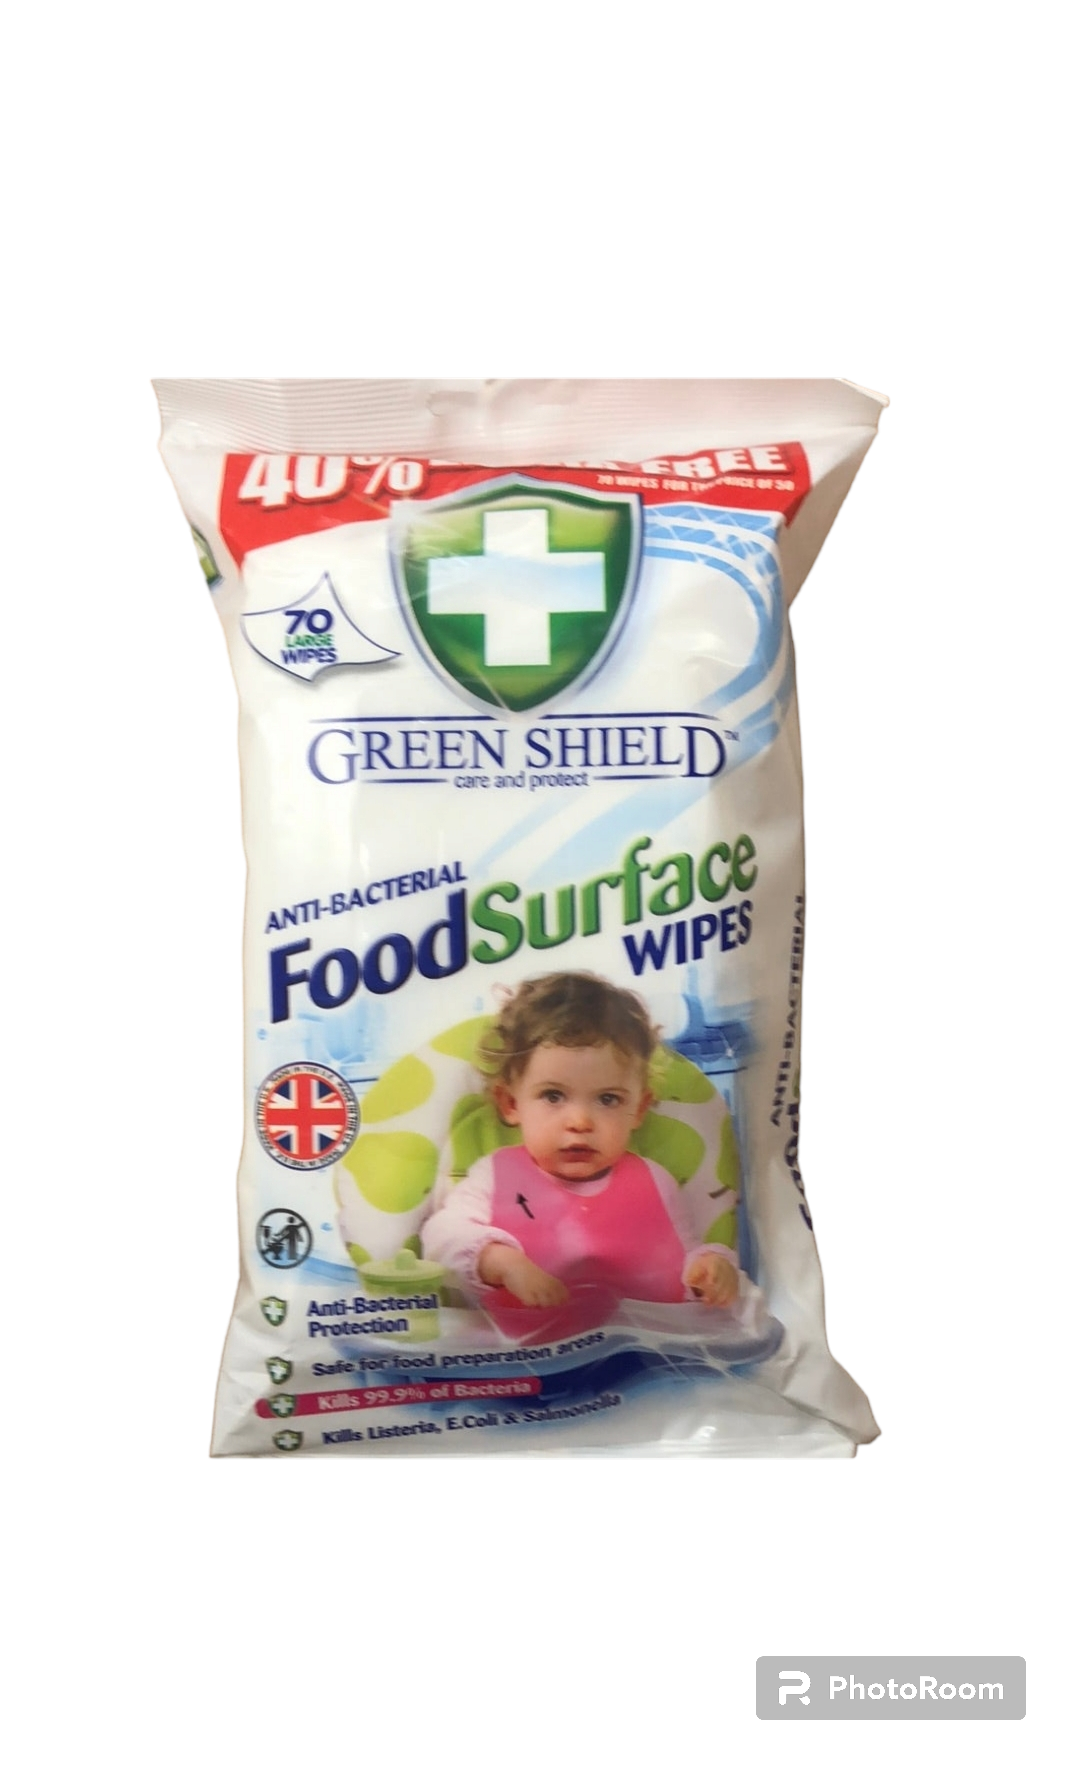 Food surface wipes 72pk Weight: 395g